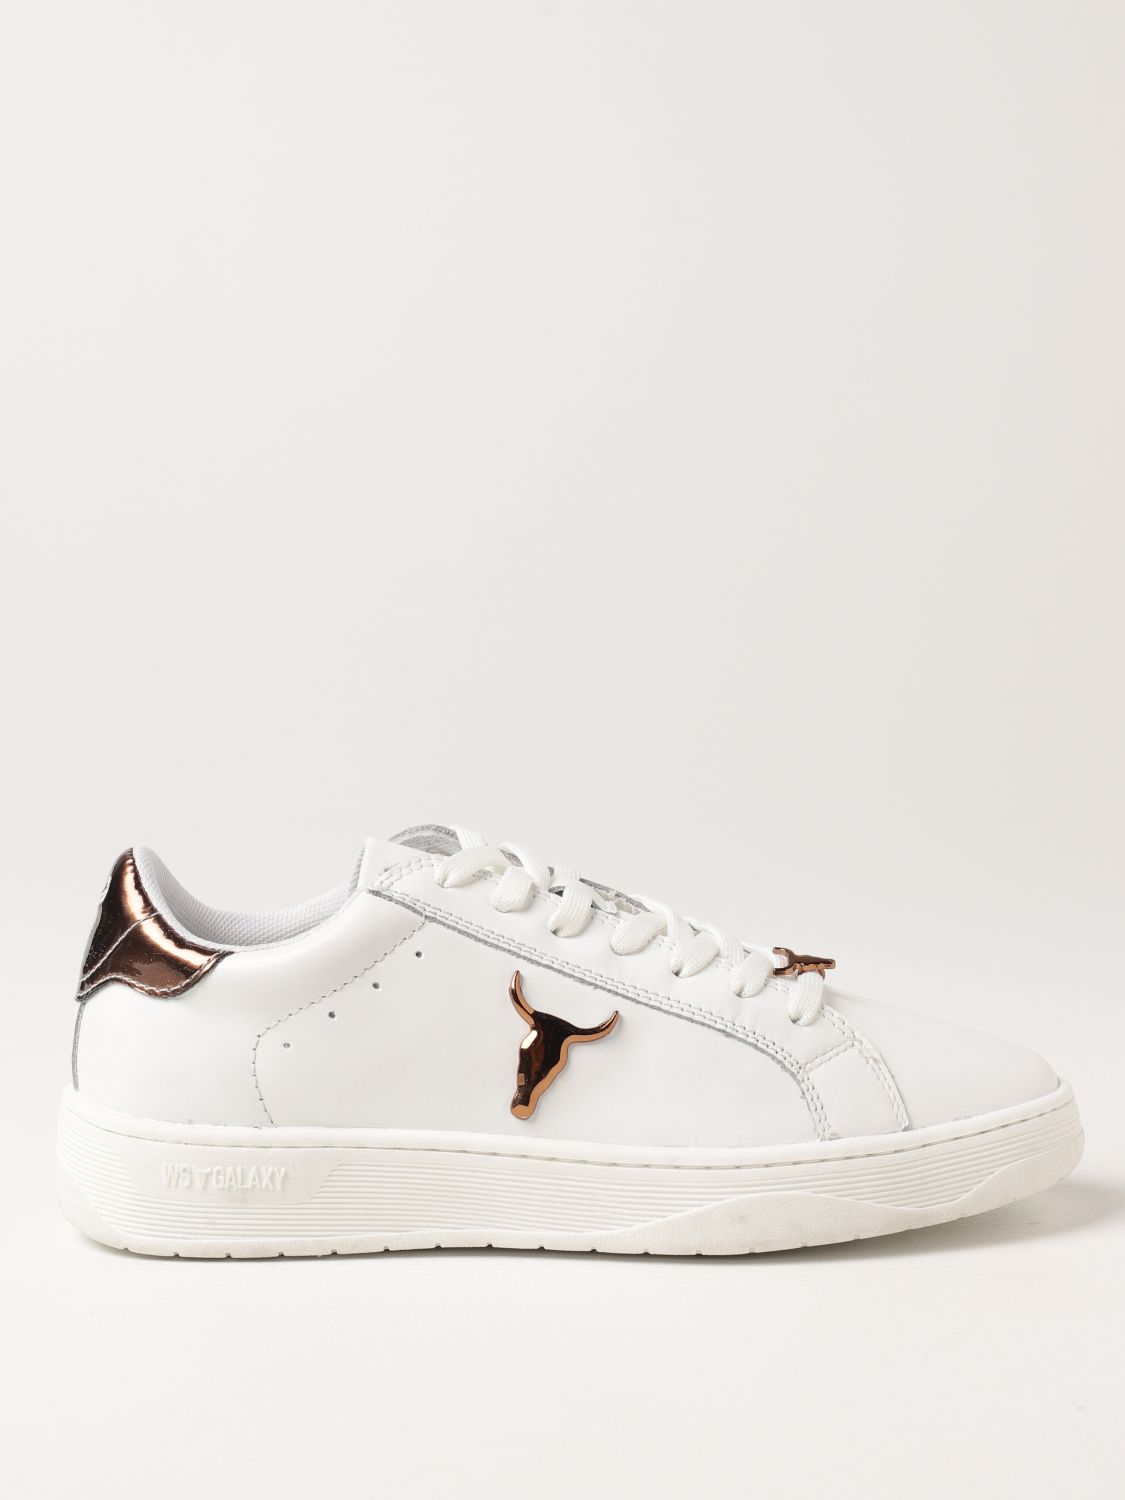 Windsorsmith Asap Outlet: Galaxy-W Windsor Smith leather sneakers ...